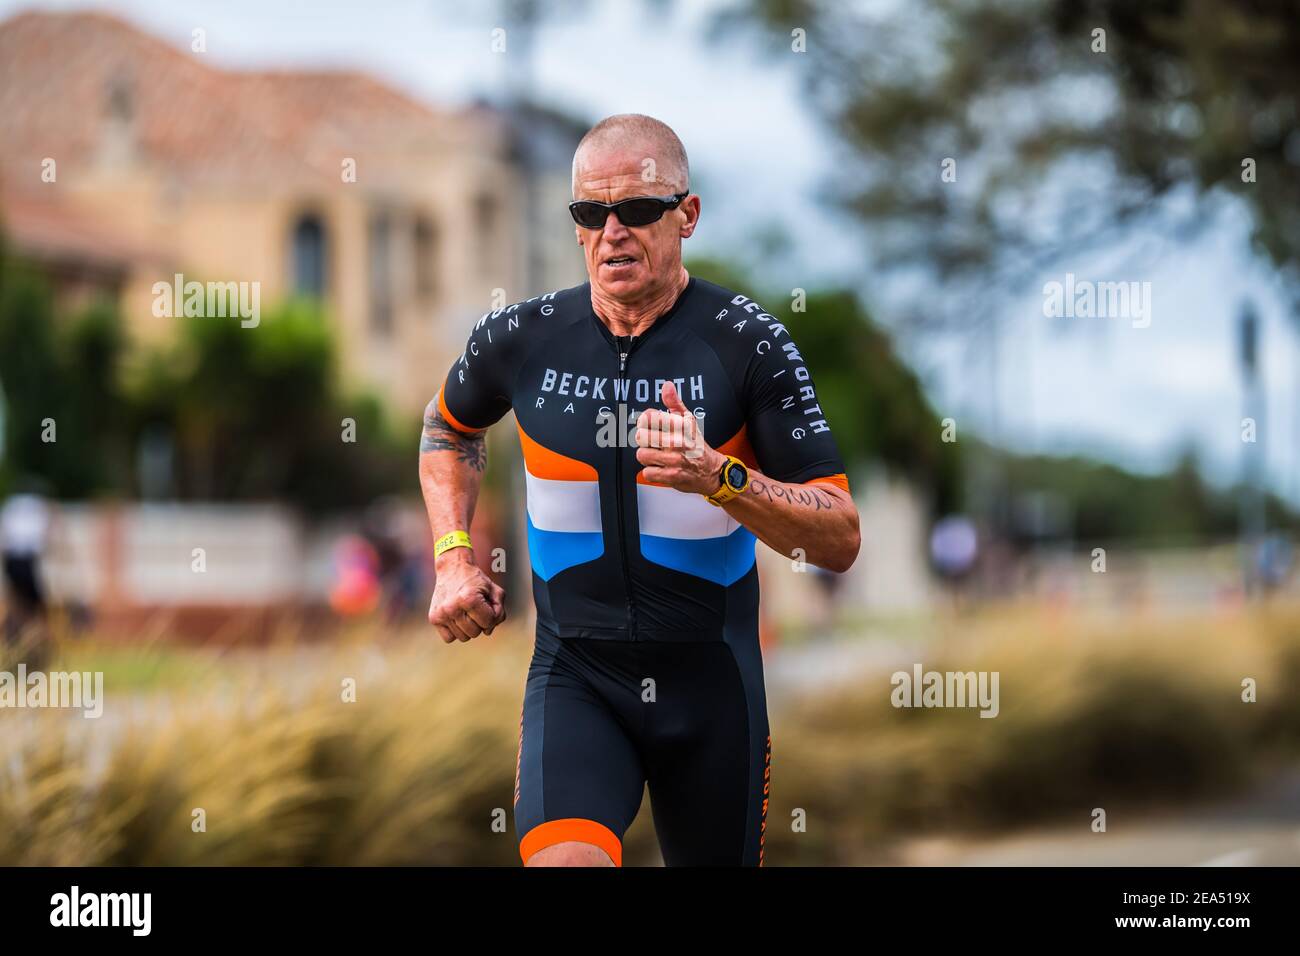 Page 11 - Triathlon Series High Resolution Stock and Images - Alamy